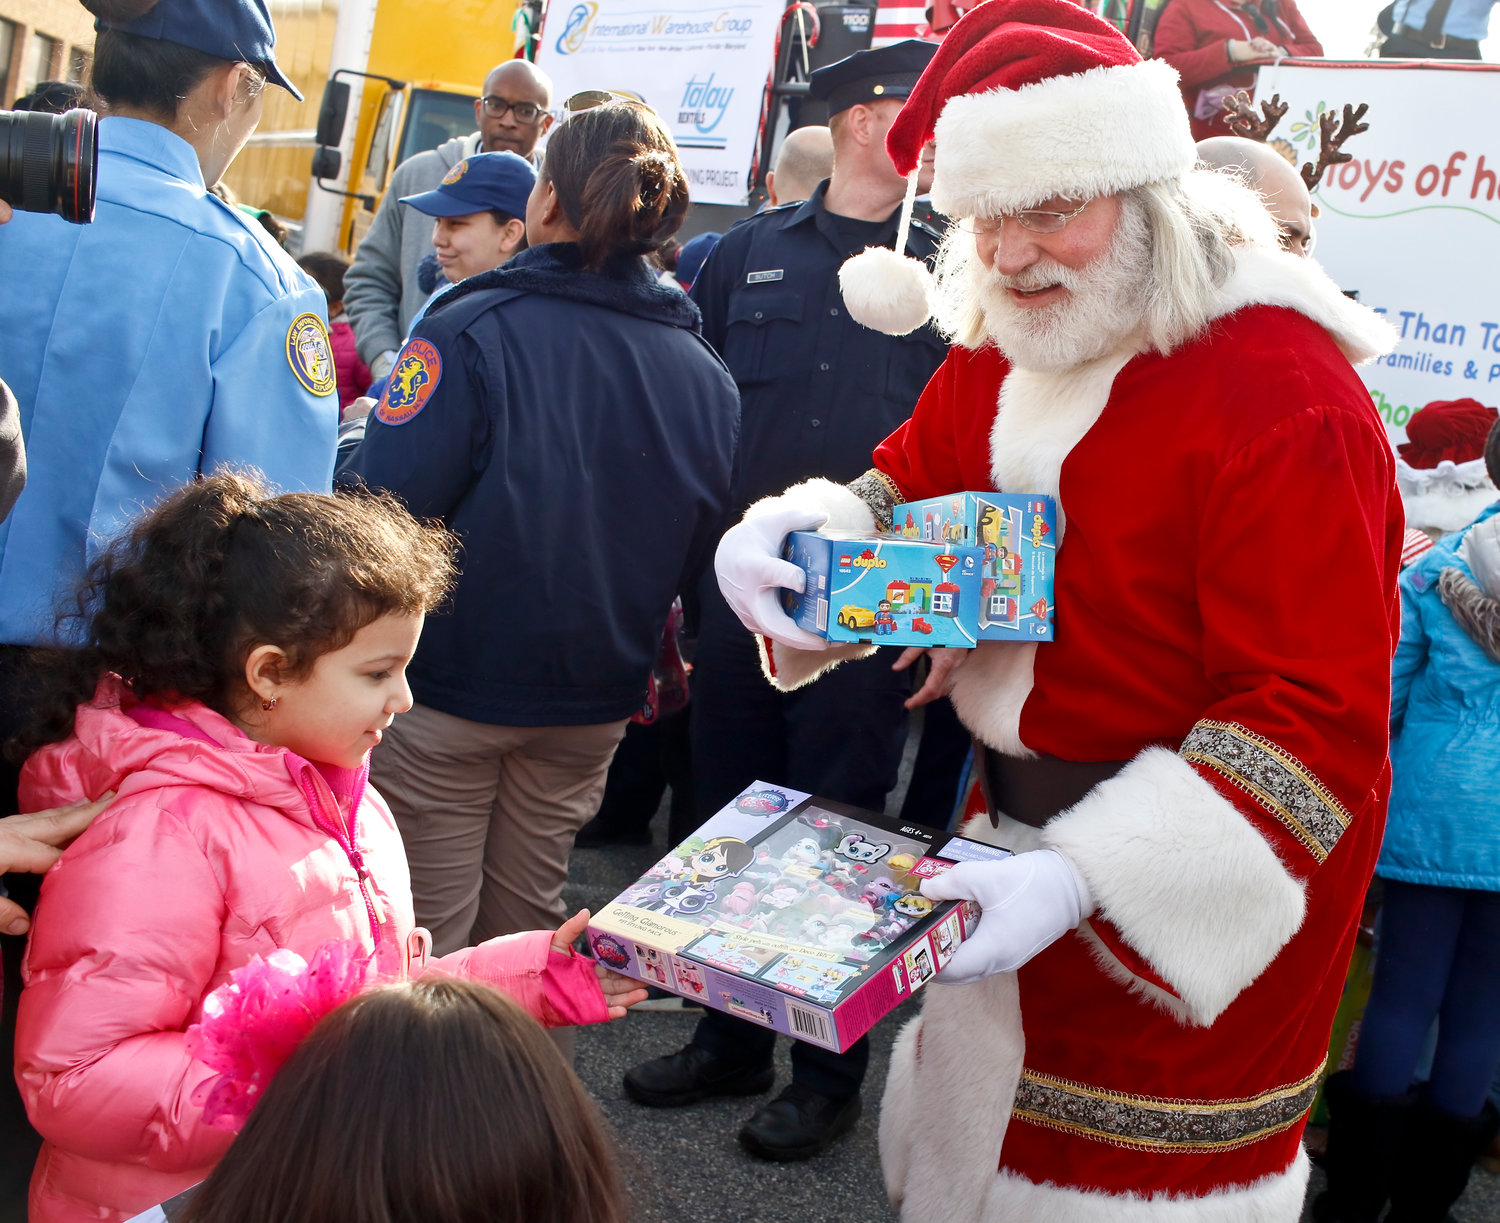 Santa Claus gave a Pet Shop set to Helen Salguero at the toys of hope event. Each child at the event received a toy.